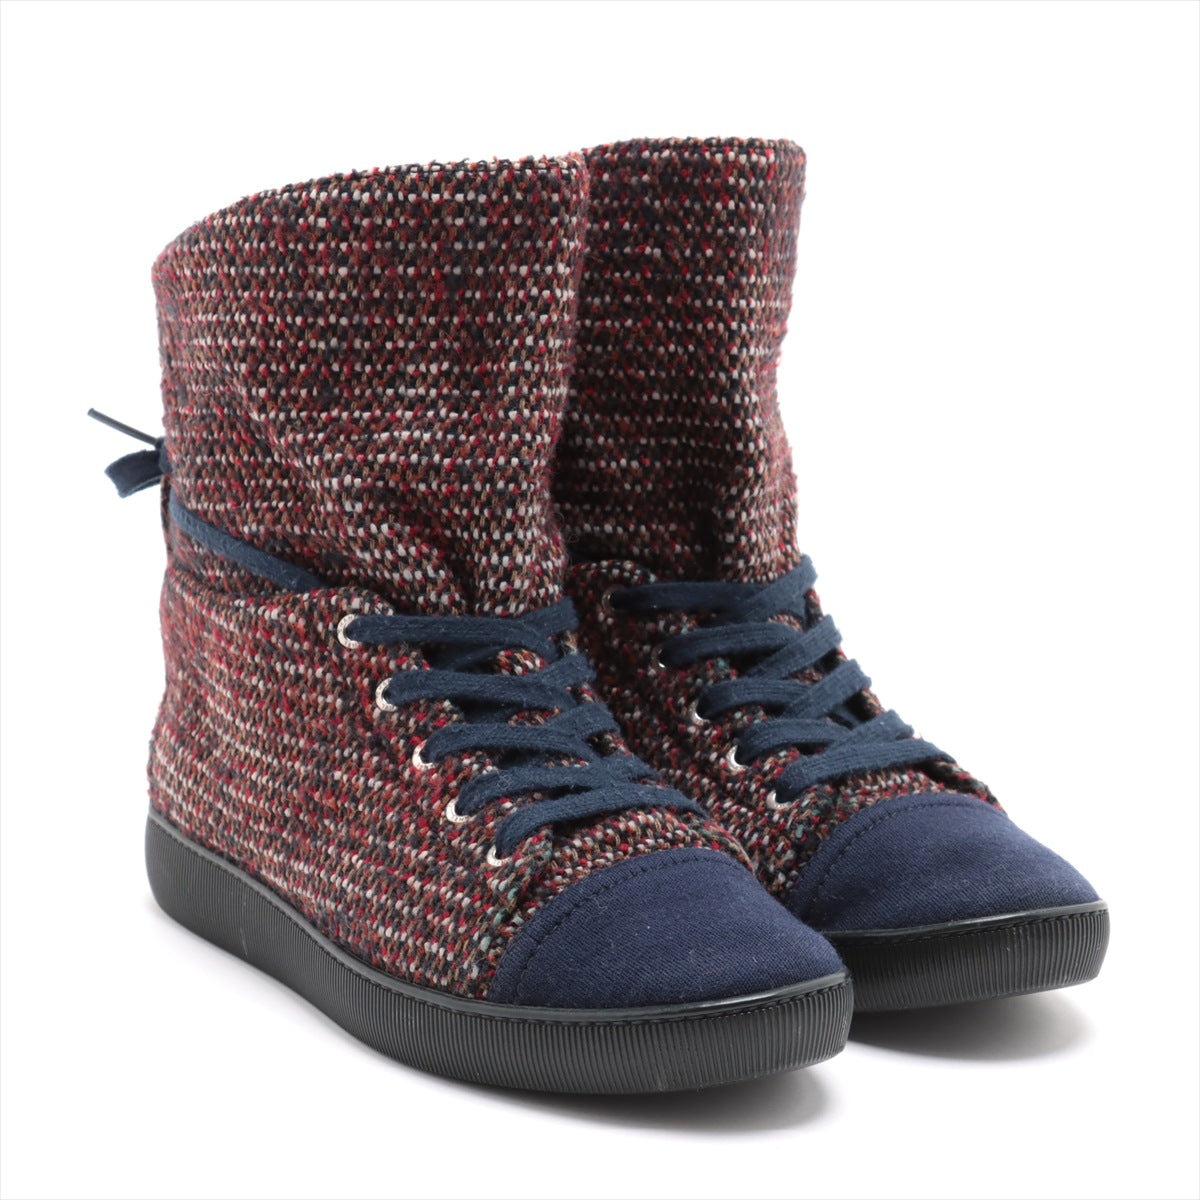 Chanel Coco Mark 14AW Tweed High-top Sneakers 40 1/2 Ladies' Multicolor G30136